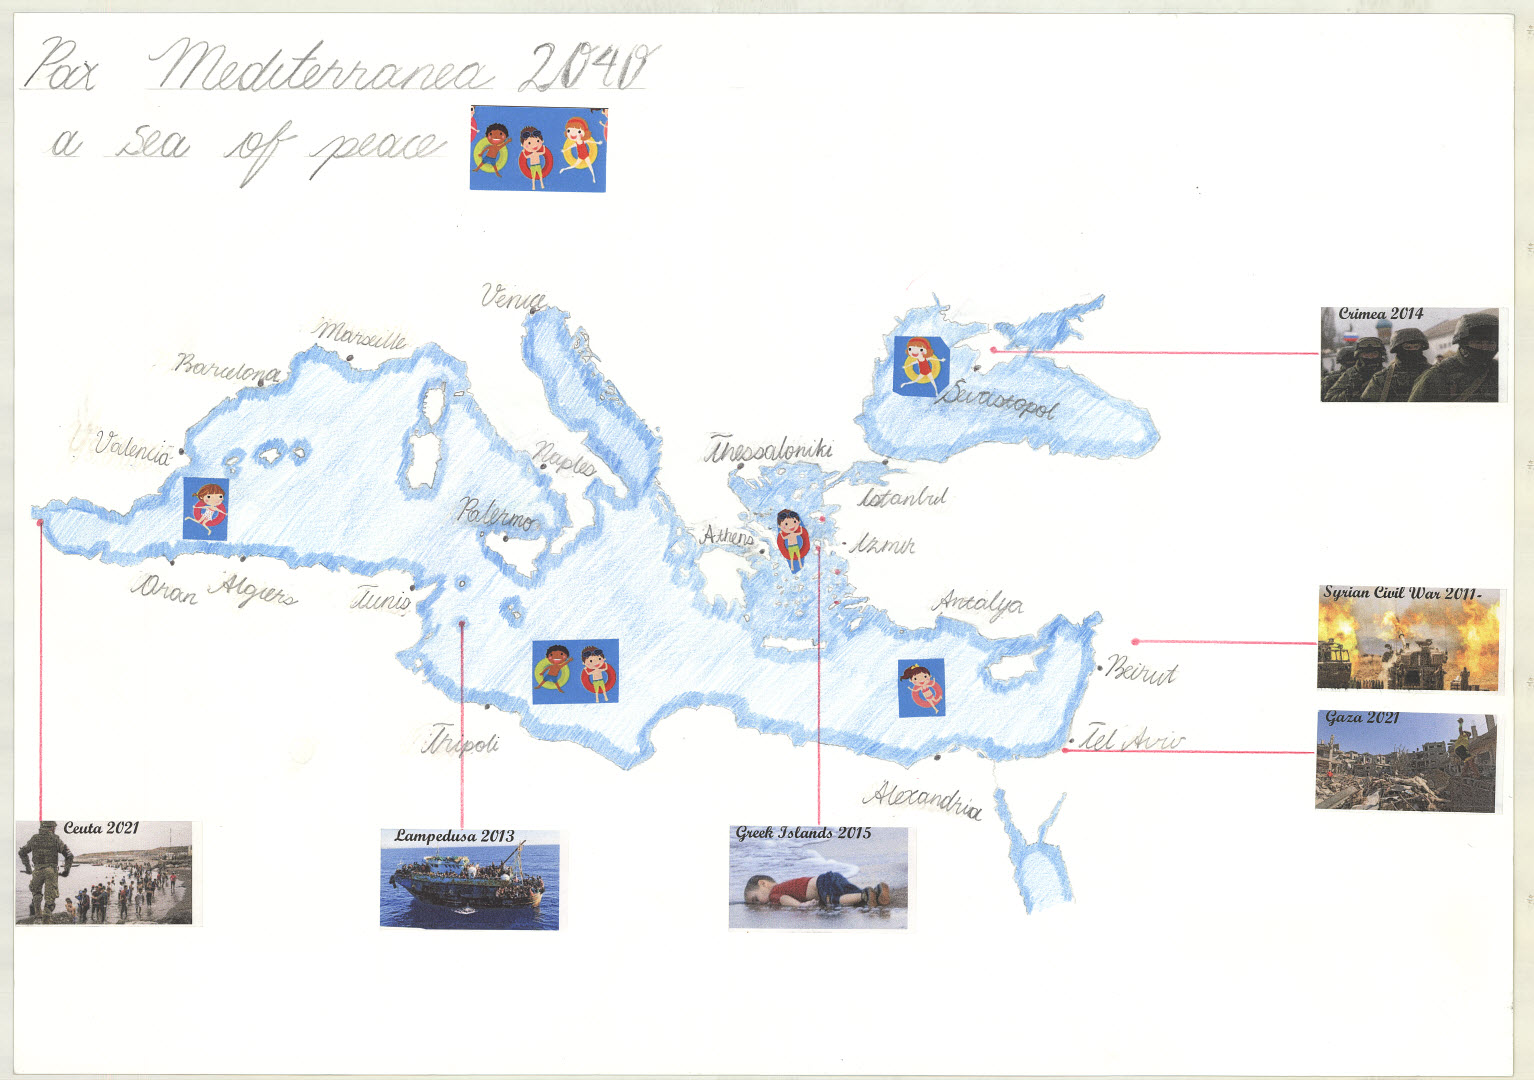 Shows the Mediterranean Sea and Greece with children relaxing; images surrounding the map show wars and tragic events